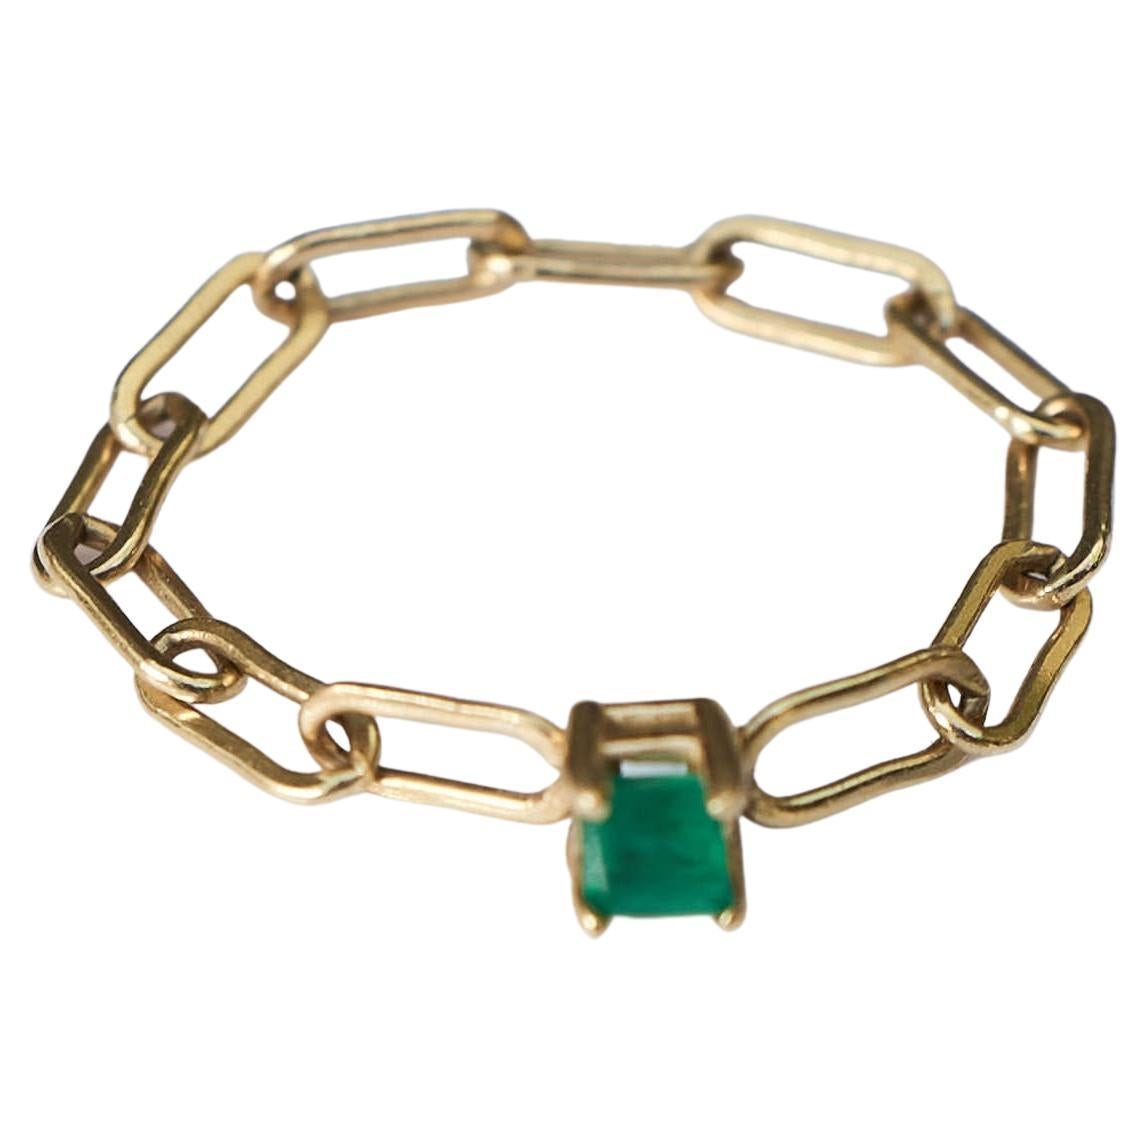  Emerald  Gold Chain Ring 14K Stackable Square Cut J Dauphin

Made in Los Angeles

Can be custom made in any size and with different shapes on gem, Heart, Round, Square.

Made to order 2 weeks to be completed